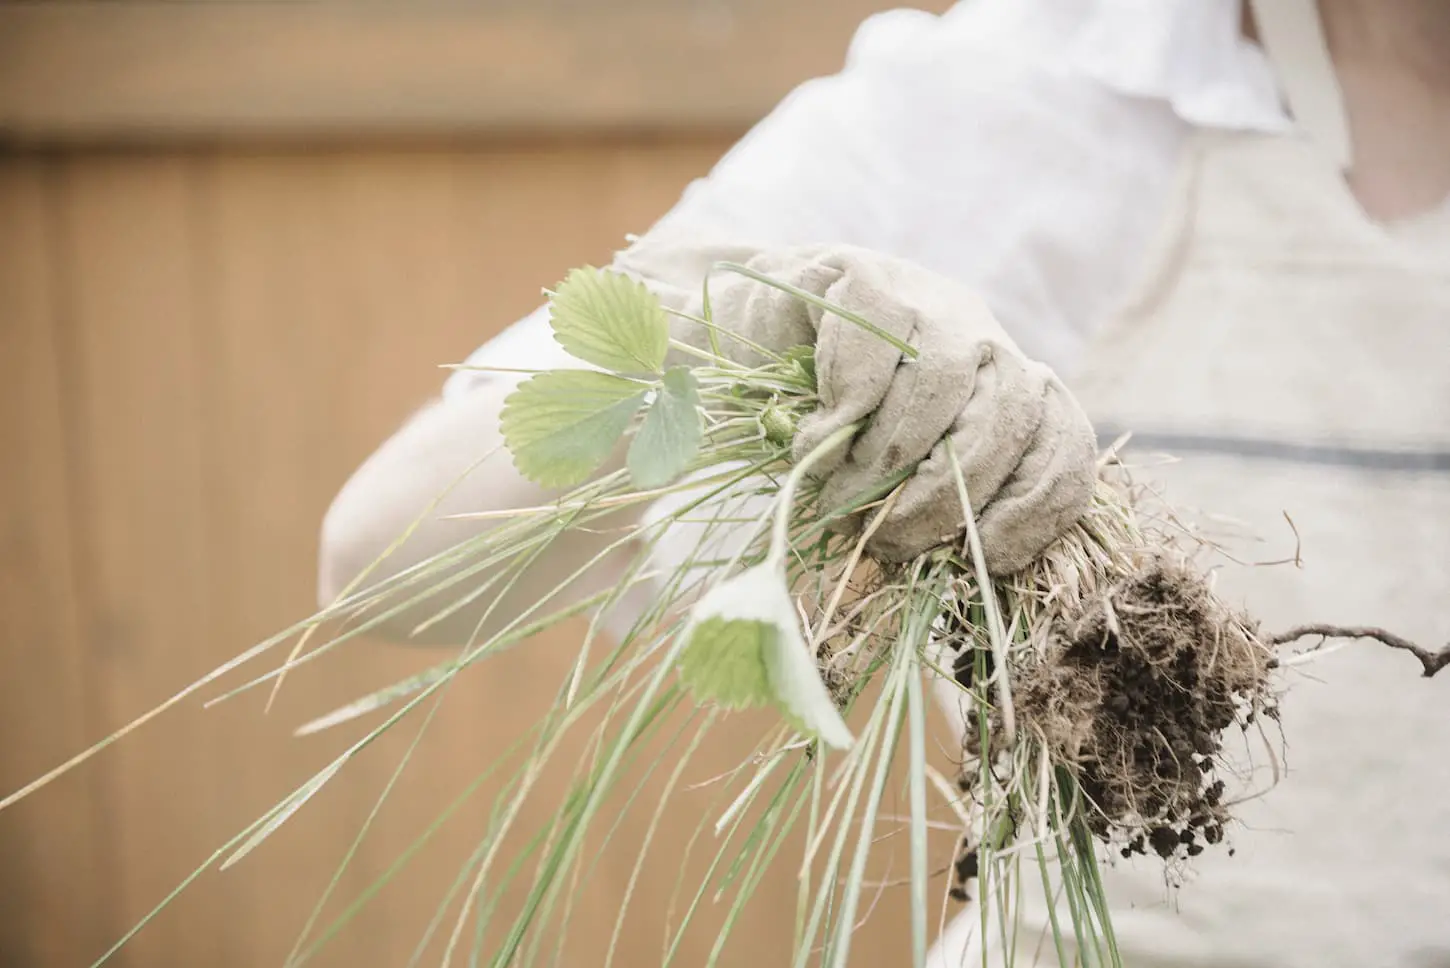 An image of a woman wearing a gardening glove holding a bunch of weeds.